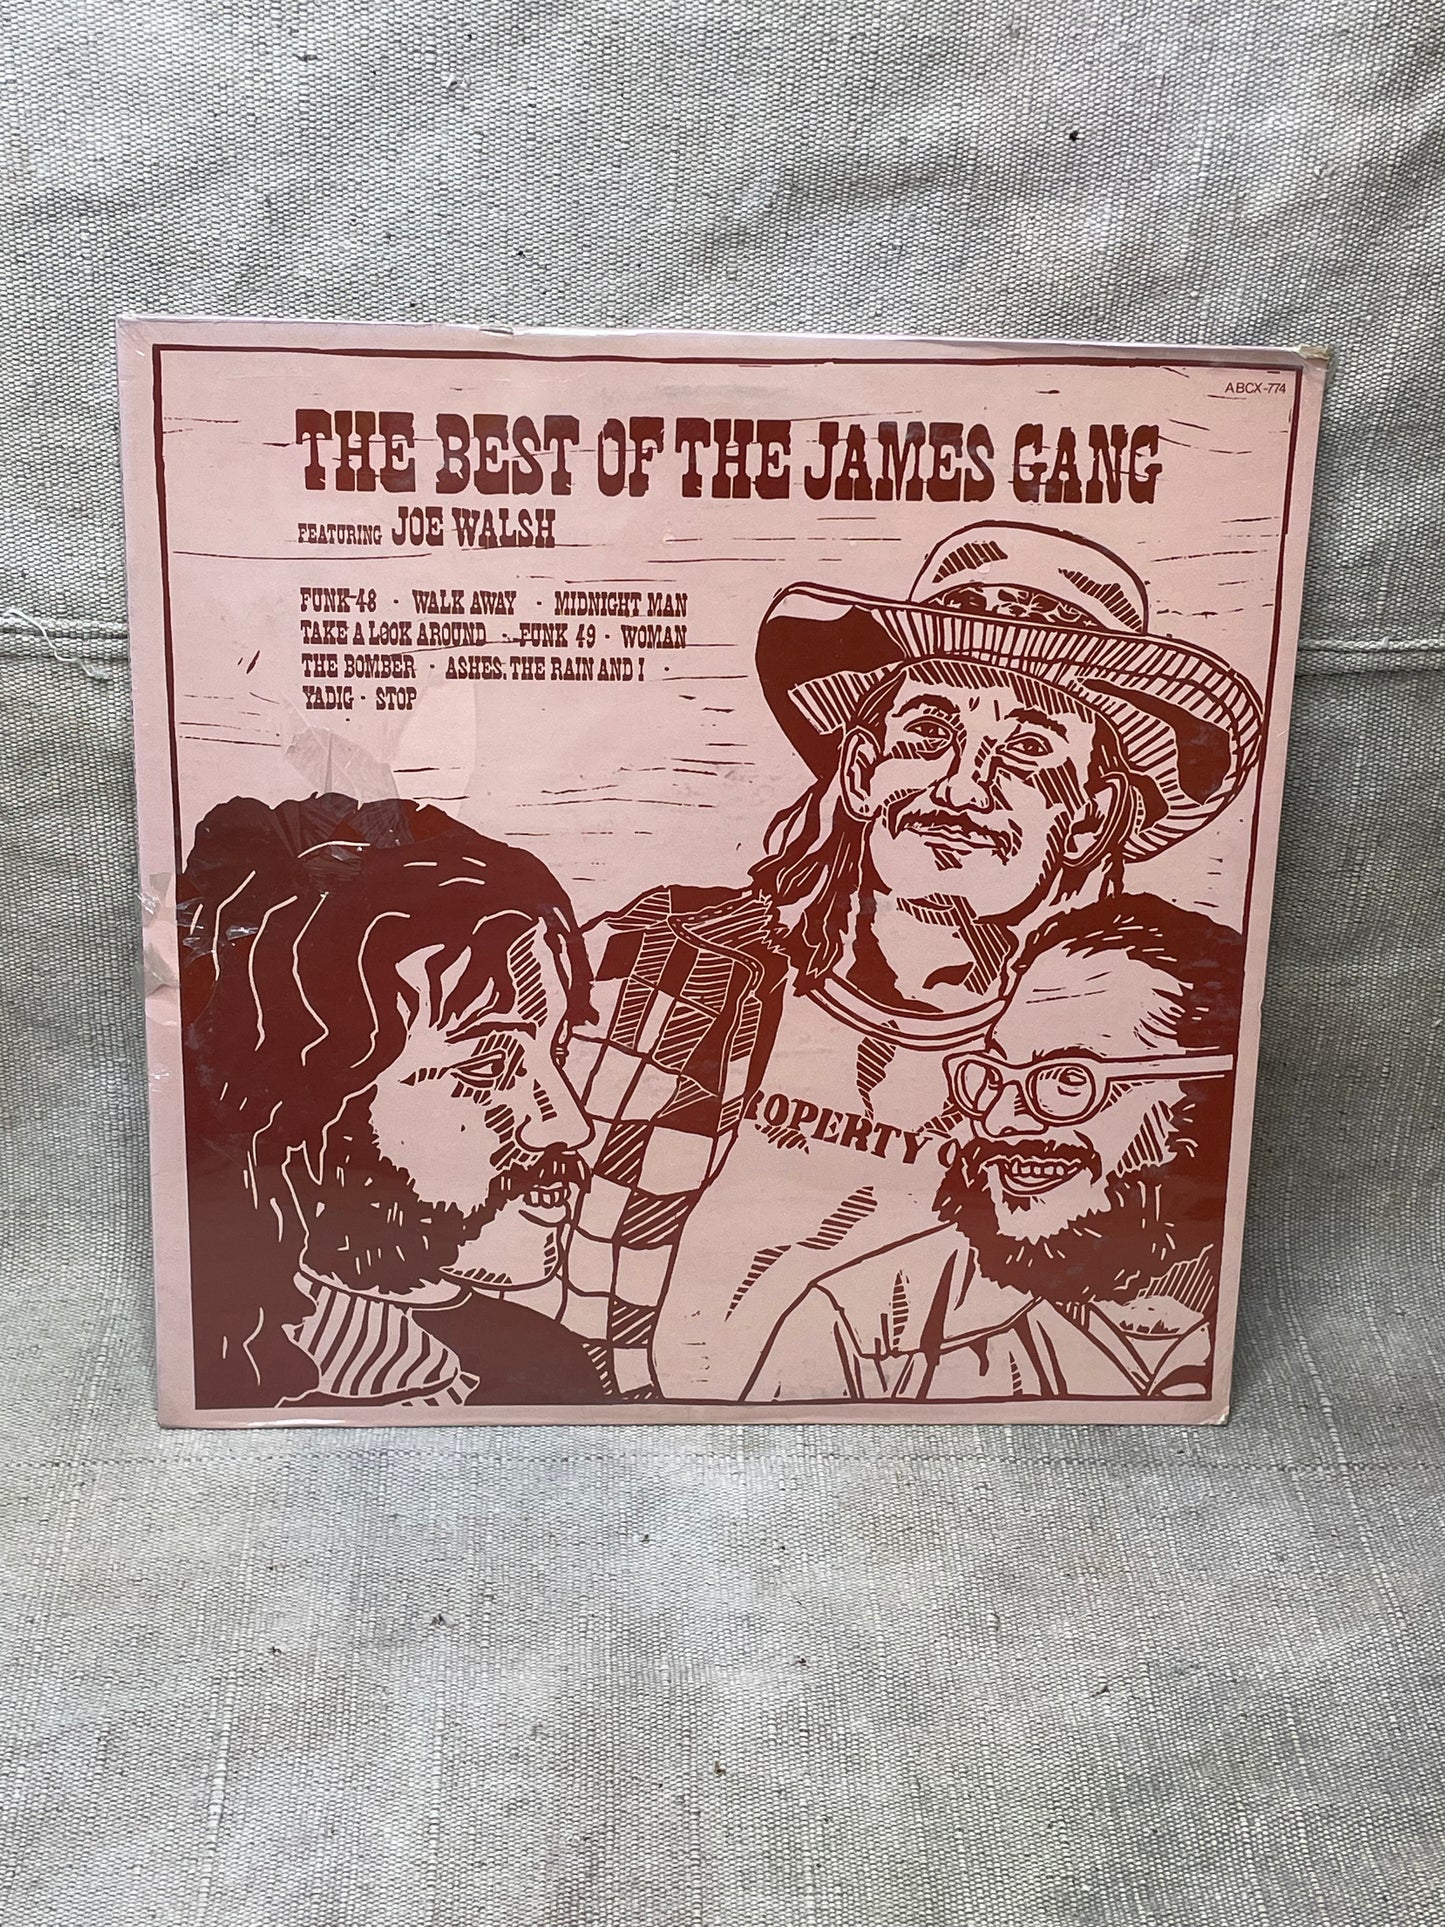 Vintage SEALED James Gang Featuring Joe Walsh The Best of the James Gang Record LP